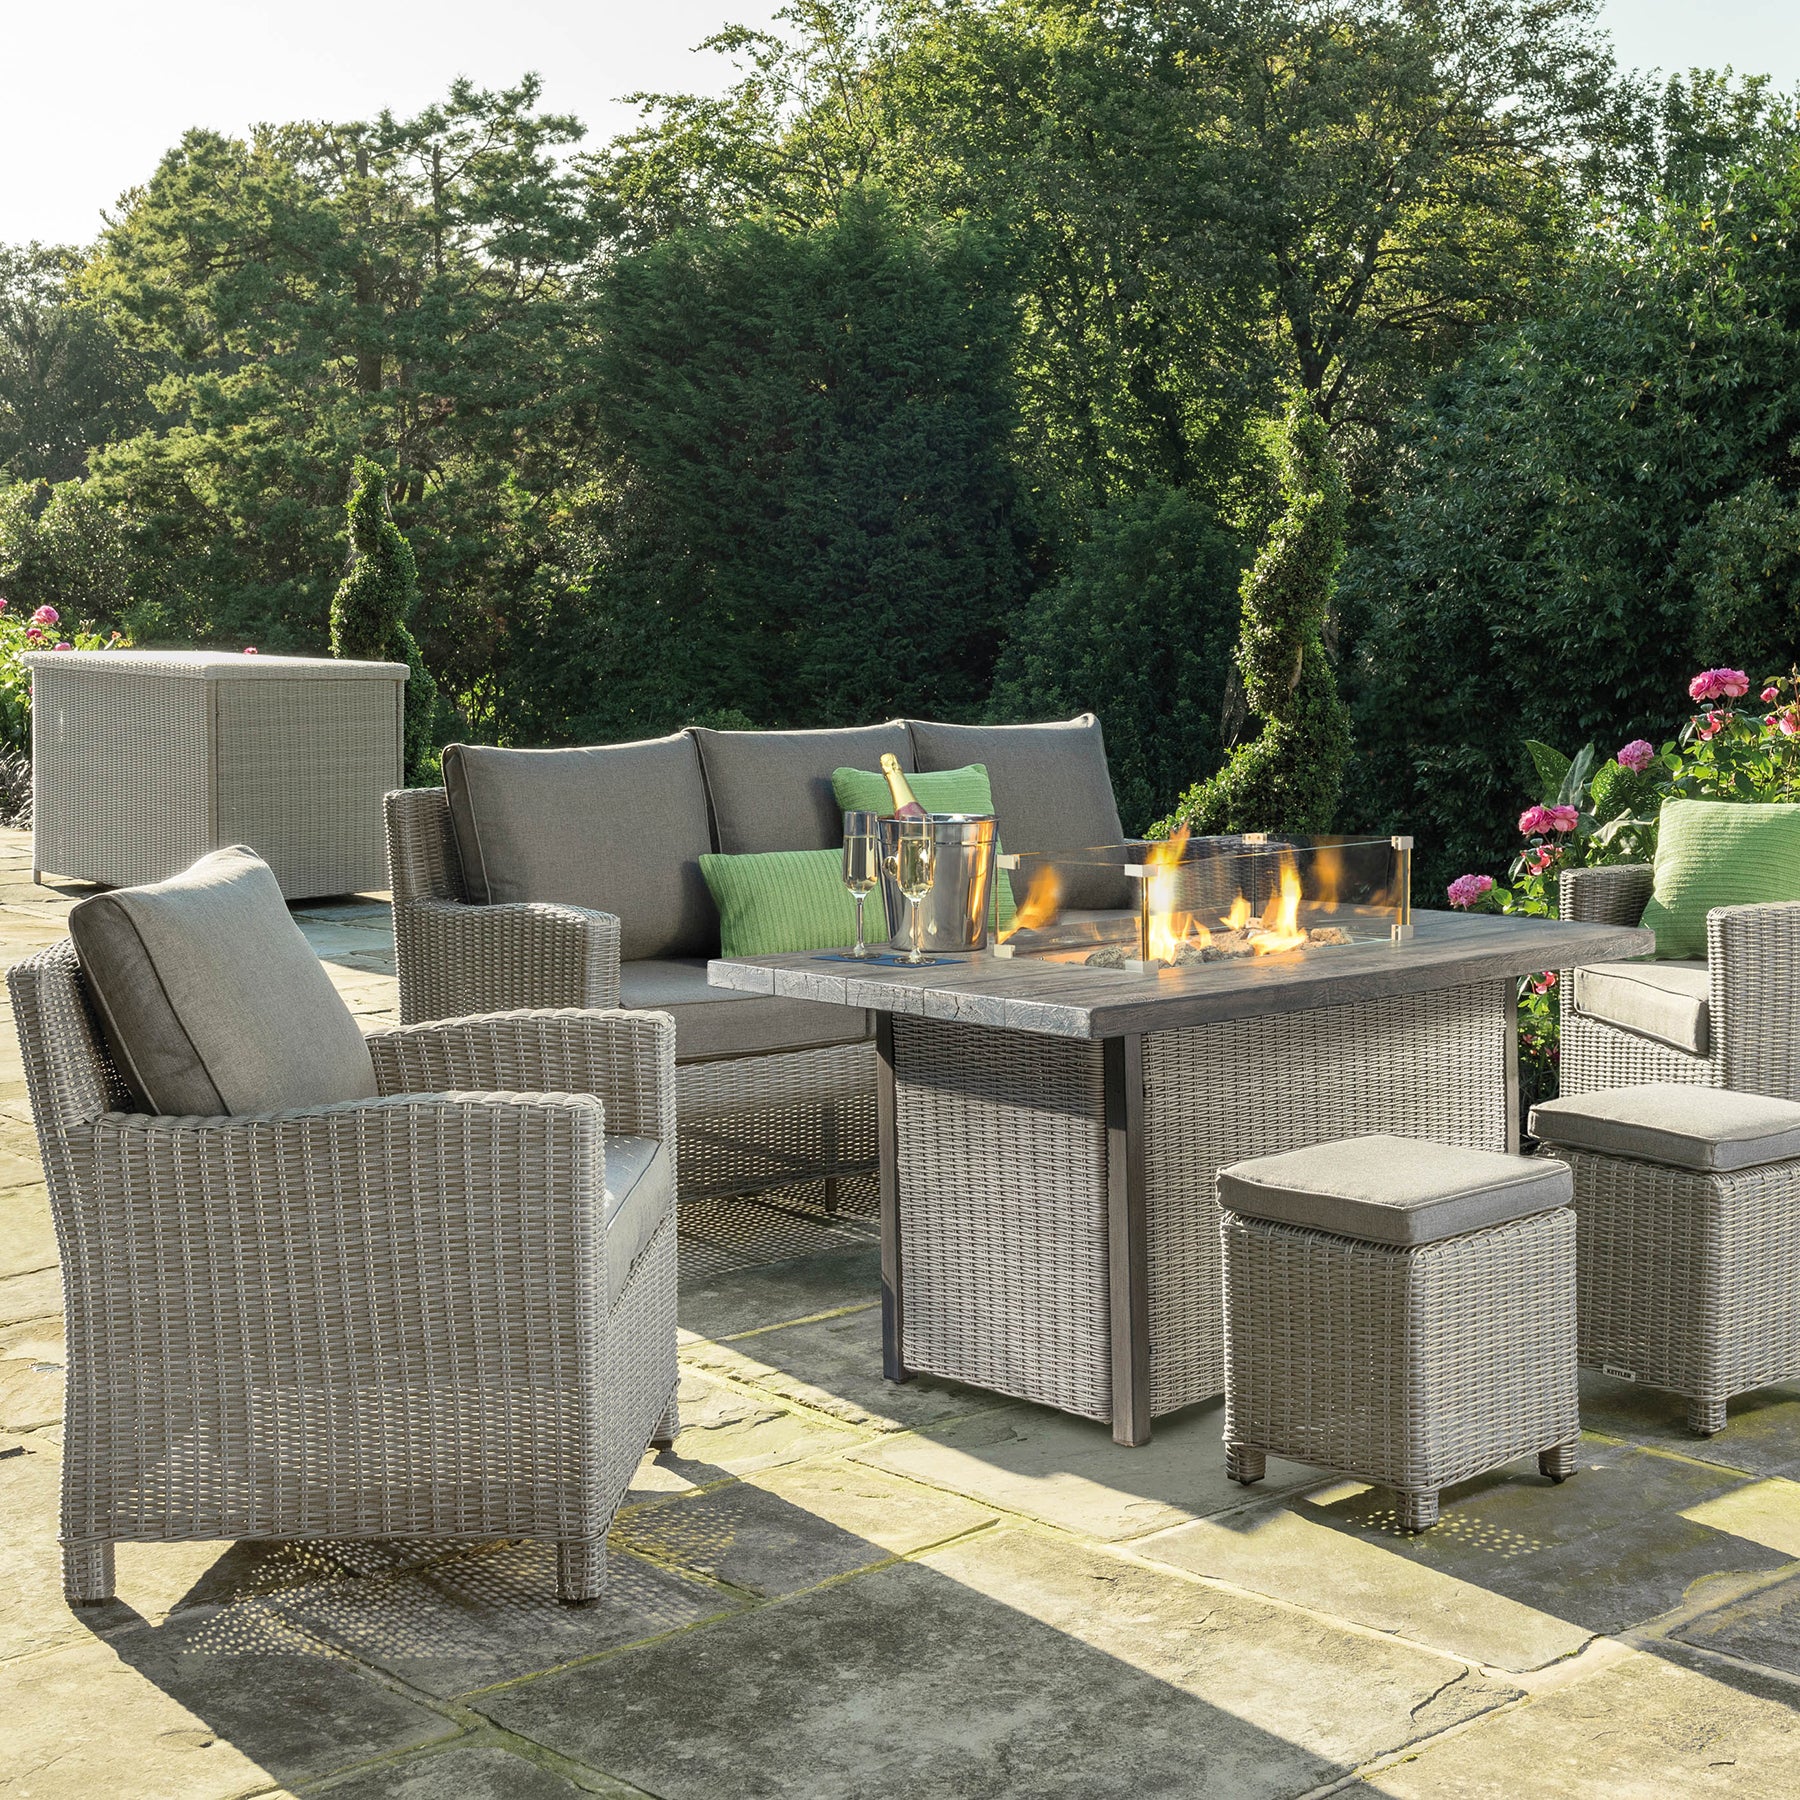 Kettler Palma Signature Wash Wicker Outdoor Casual Dining Lounge Sofa Set with Fire Pit Table